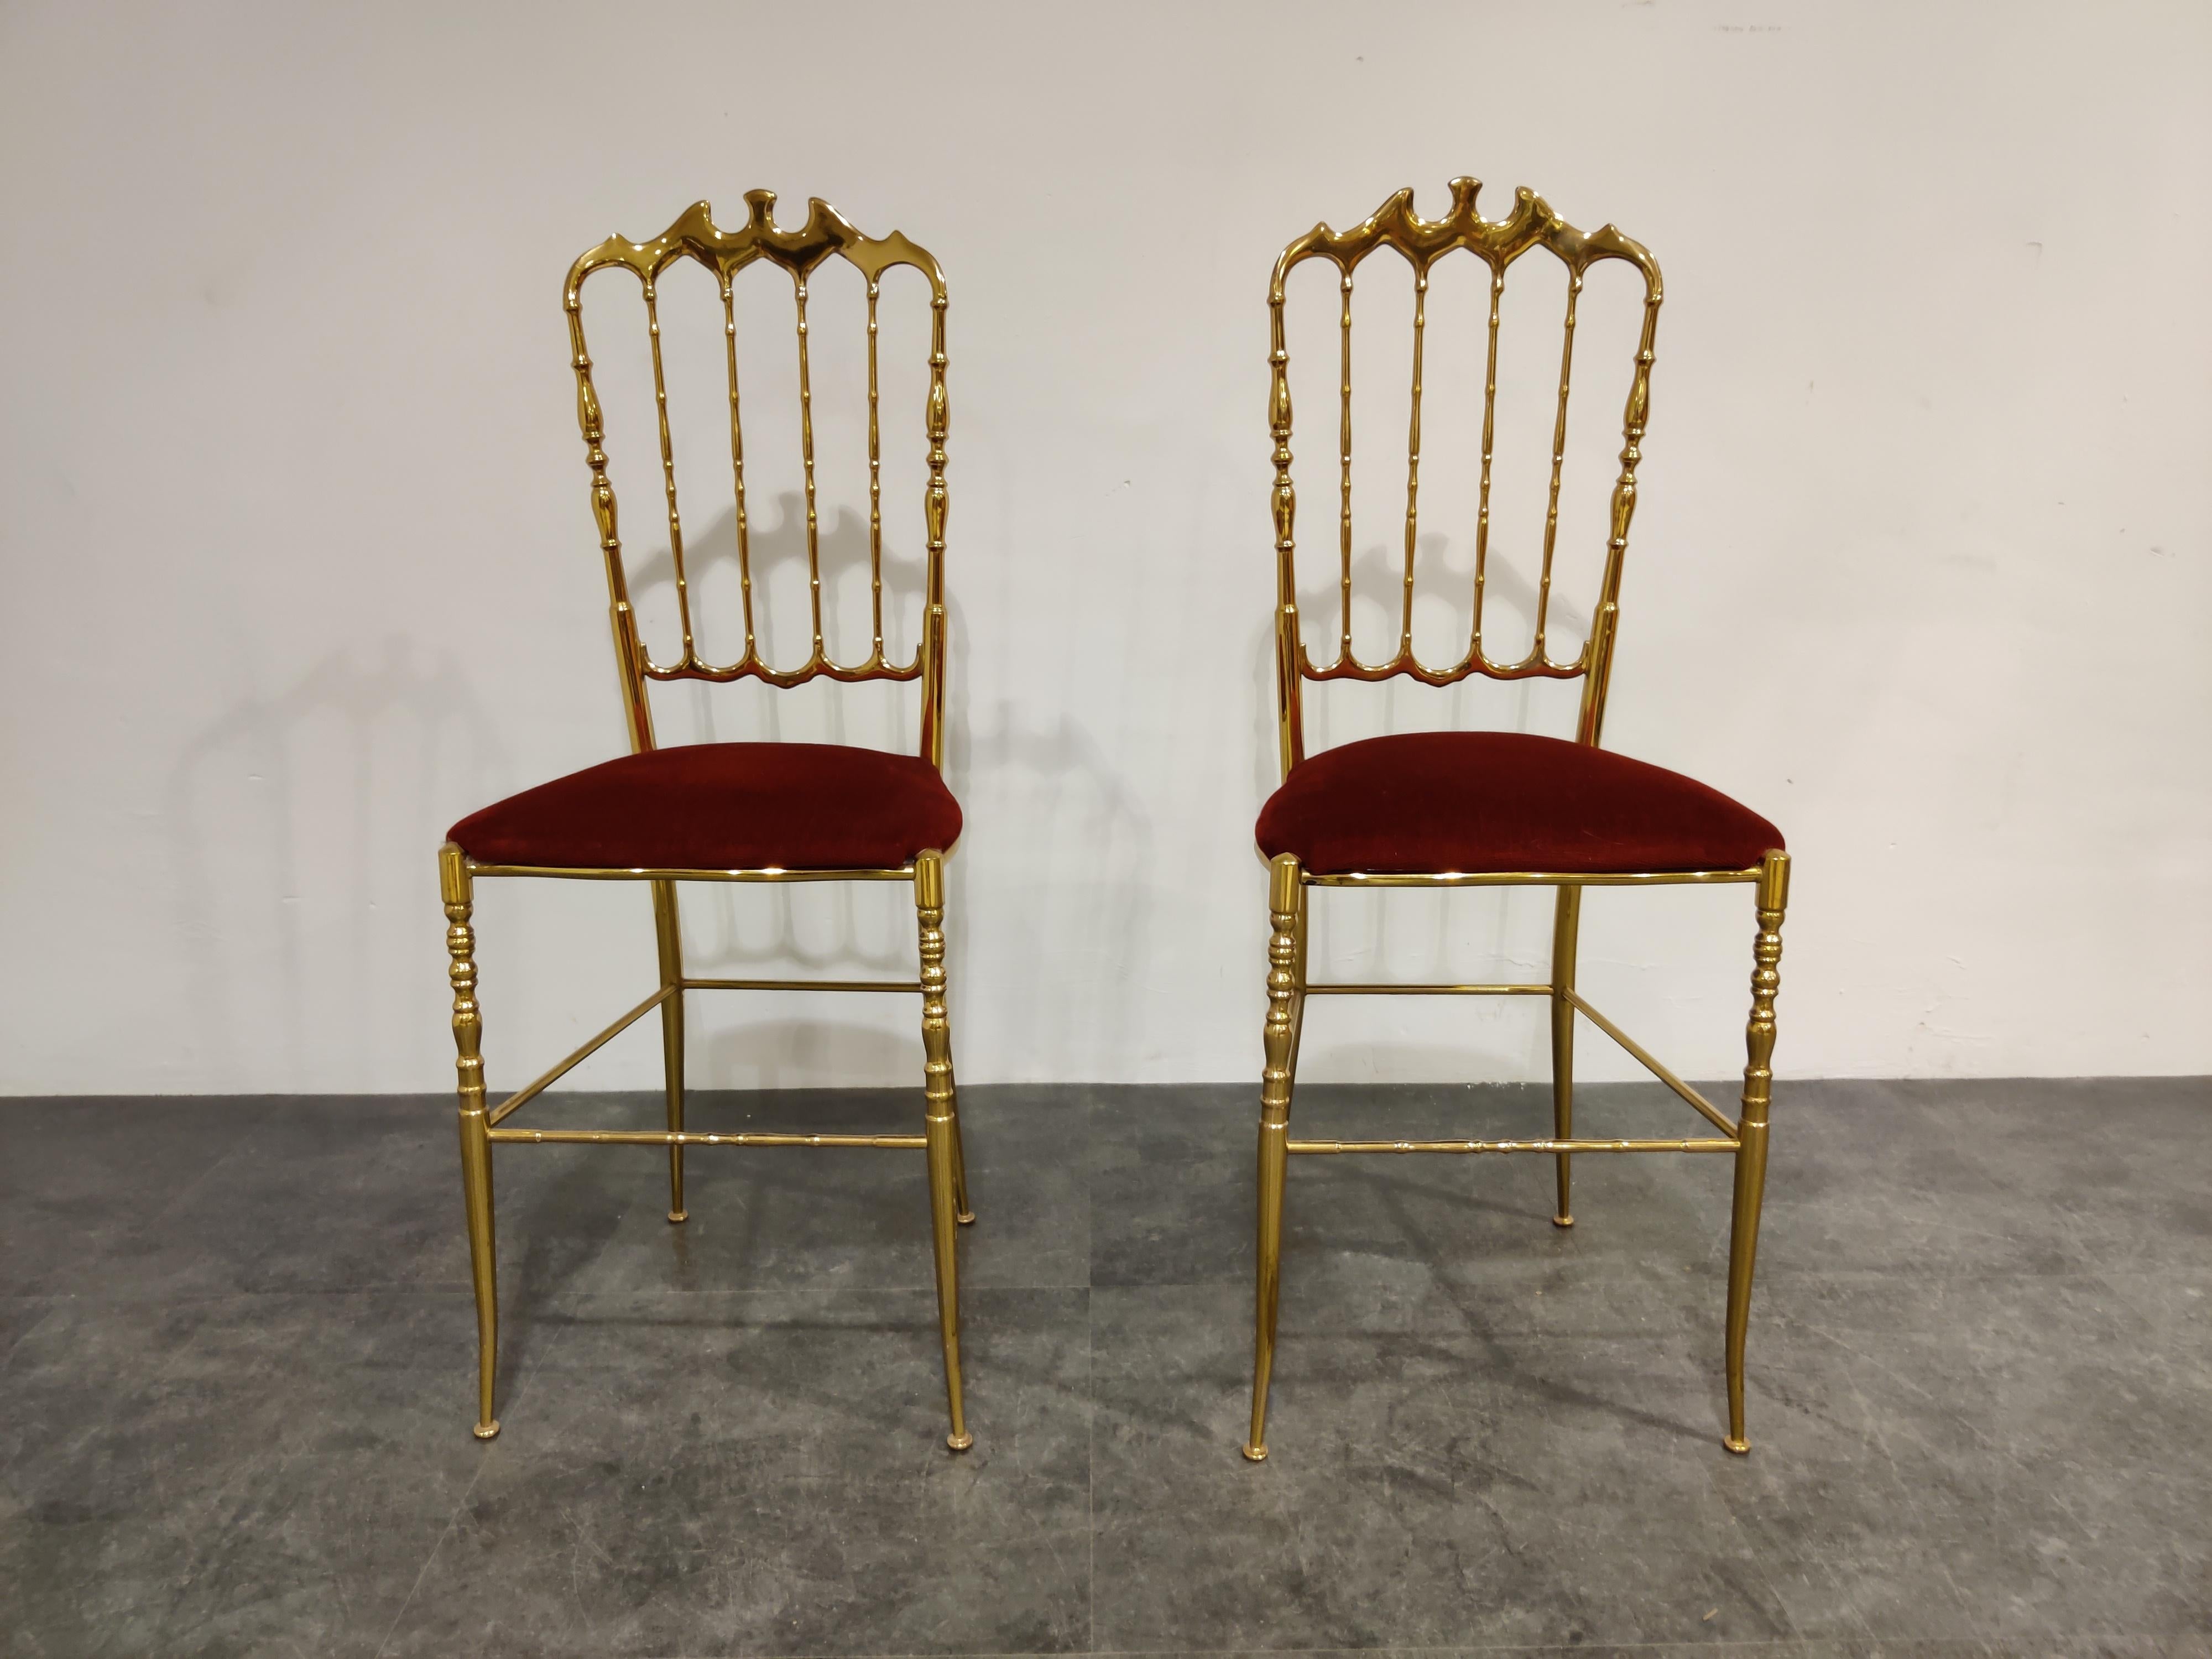 Beautiful and elegant Chiavari chairs in polished brass and a red velvet seats.

Designed by Giuseppe Gaetano Descalzi and produced since the early 19th century in the Ligurian town of Chiavari, Italy.

The chairs can be used for a desk, as